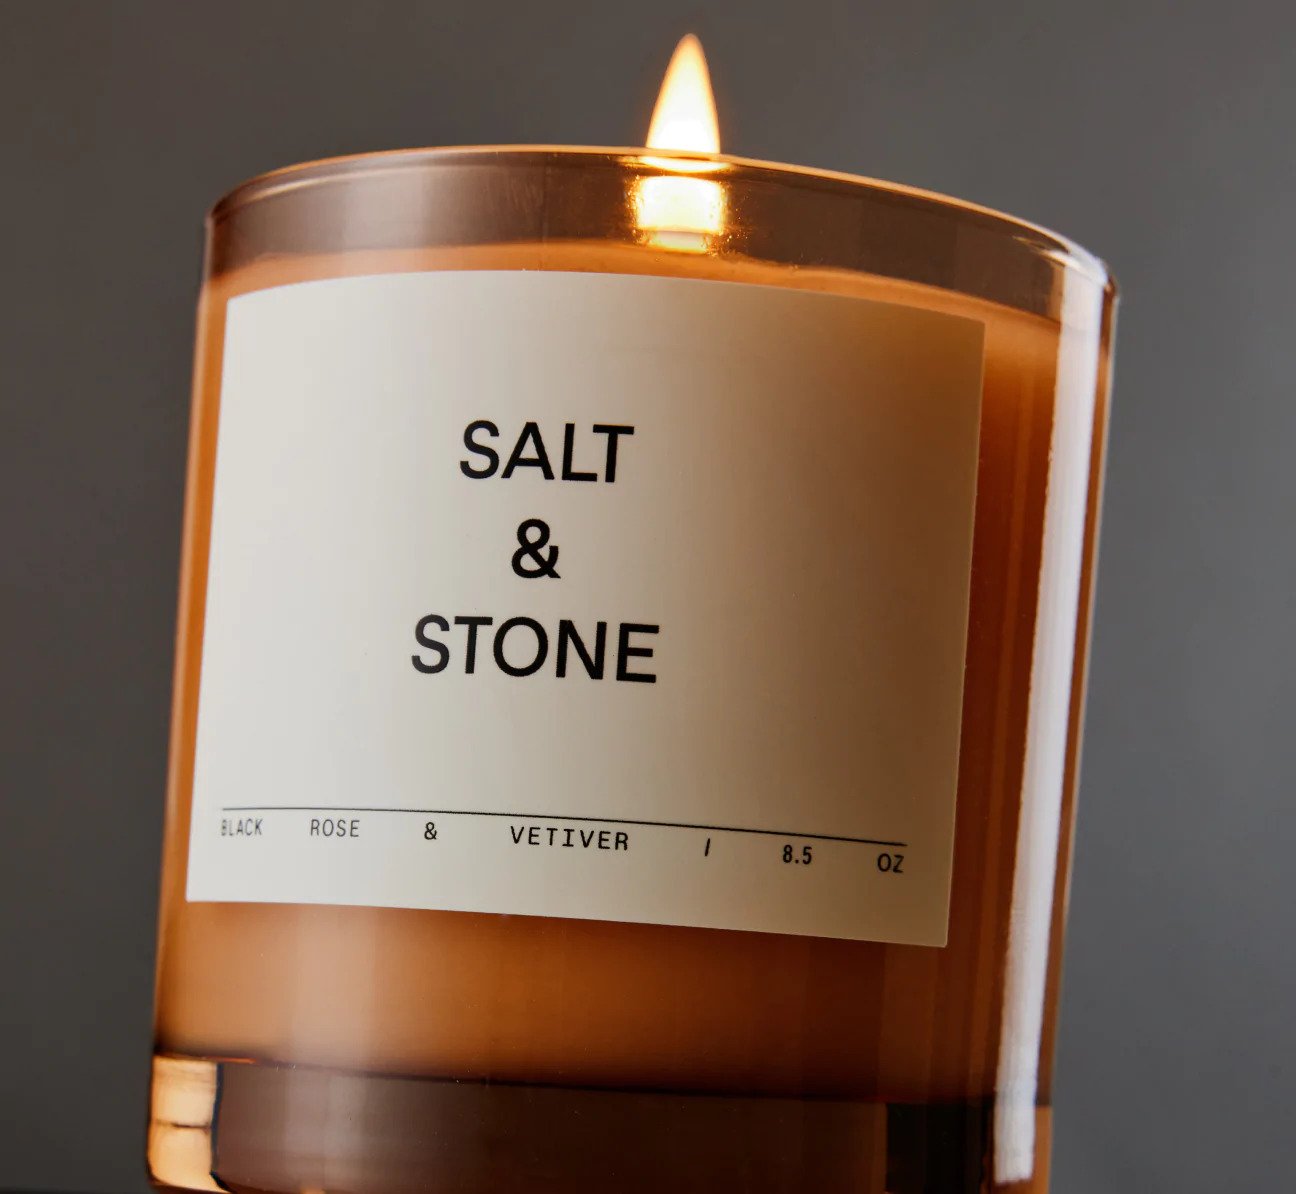 Salt &amp; Stone - Black rose and vetiver scented candle